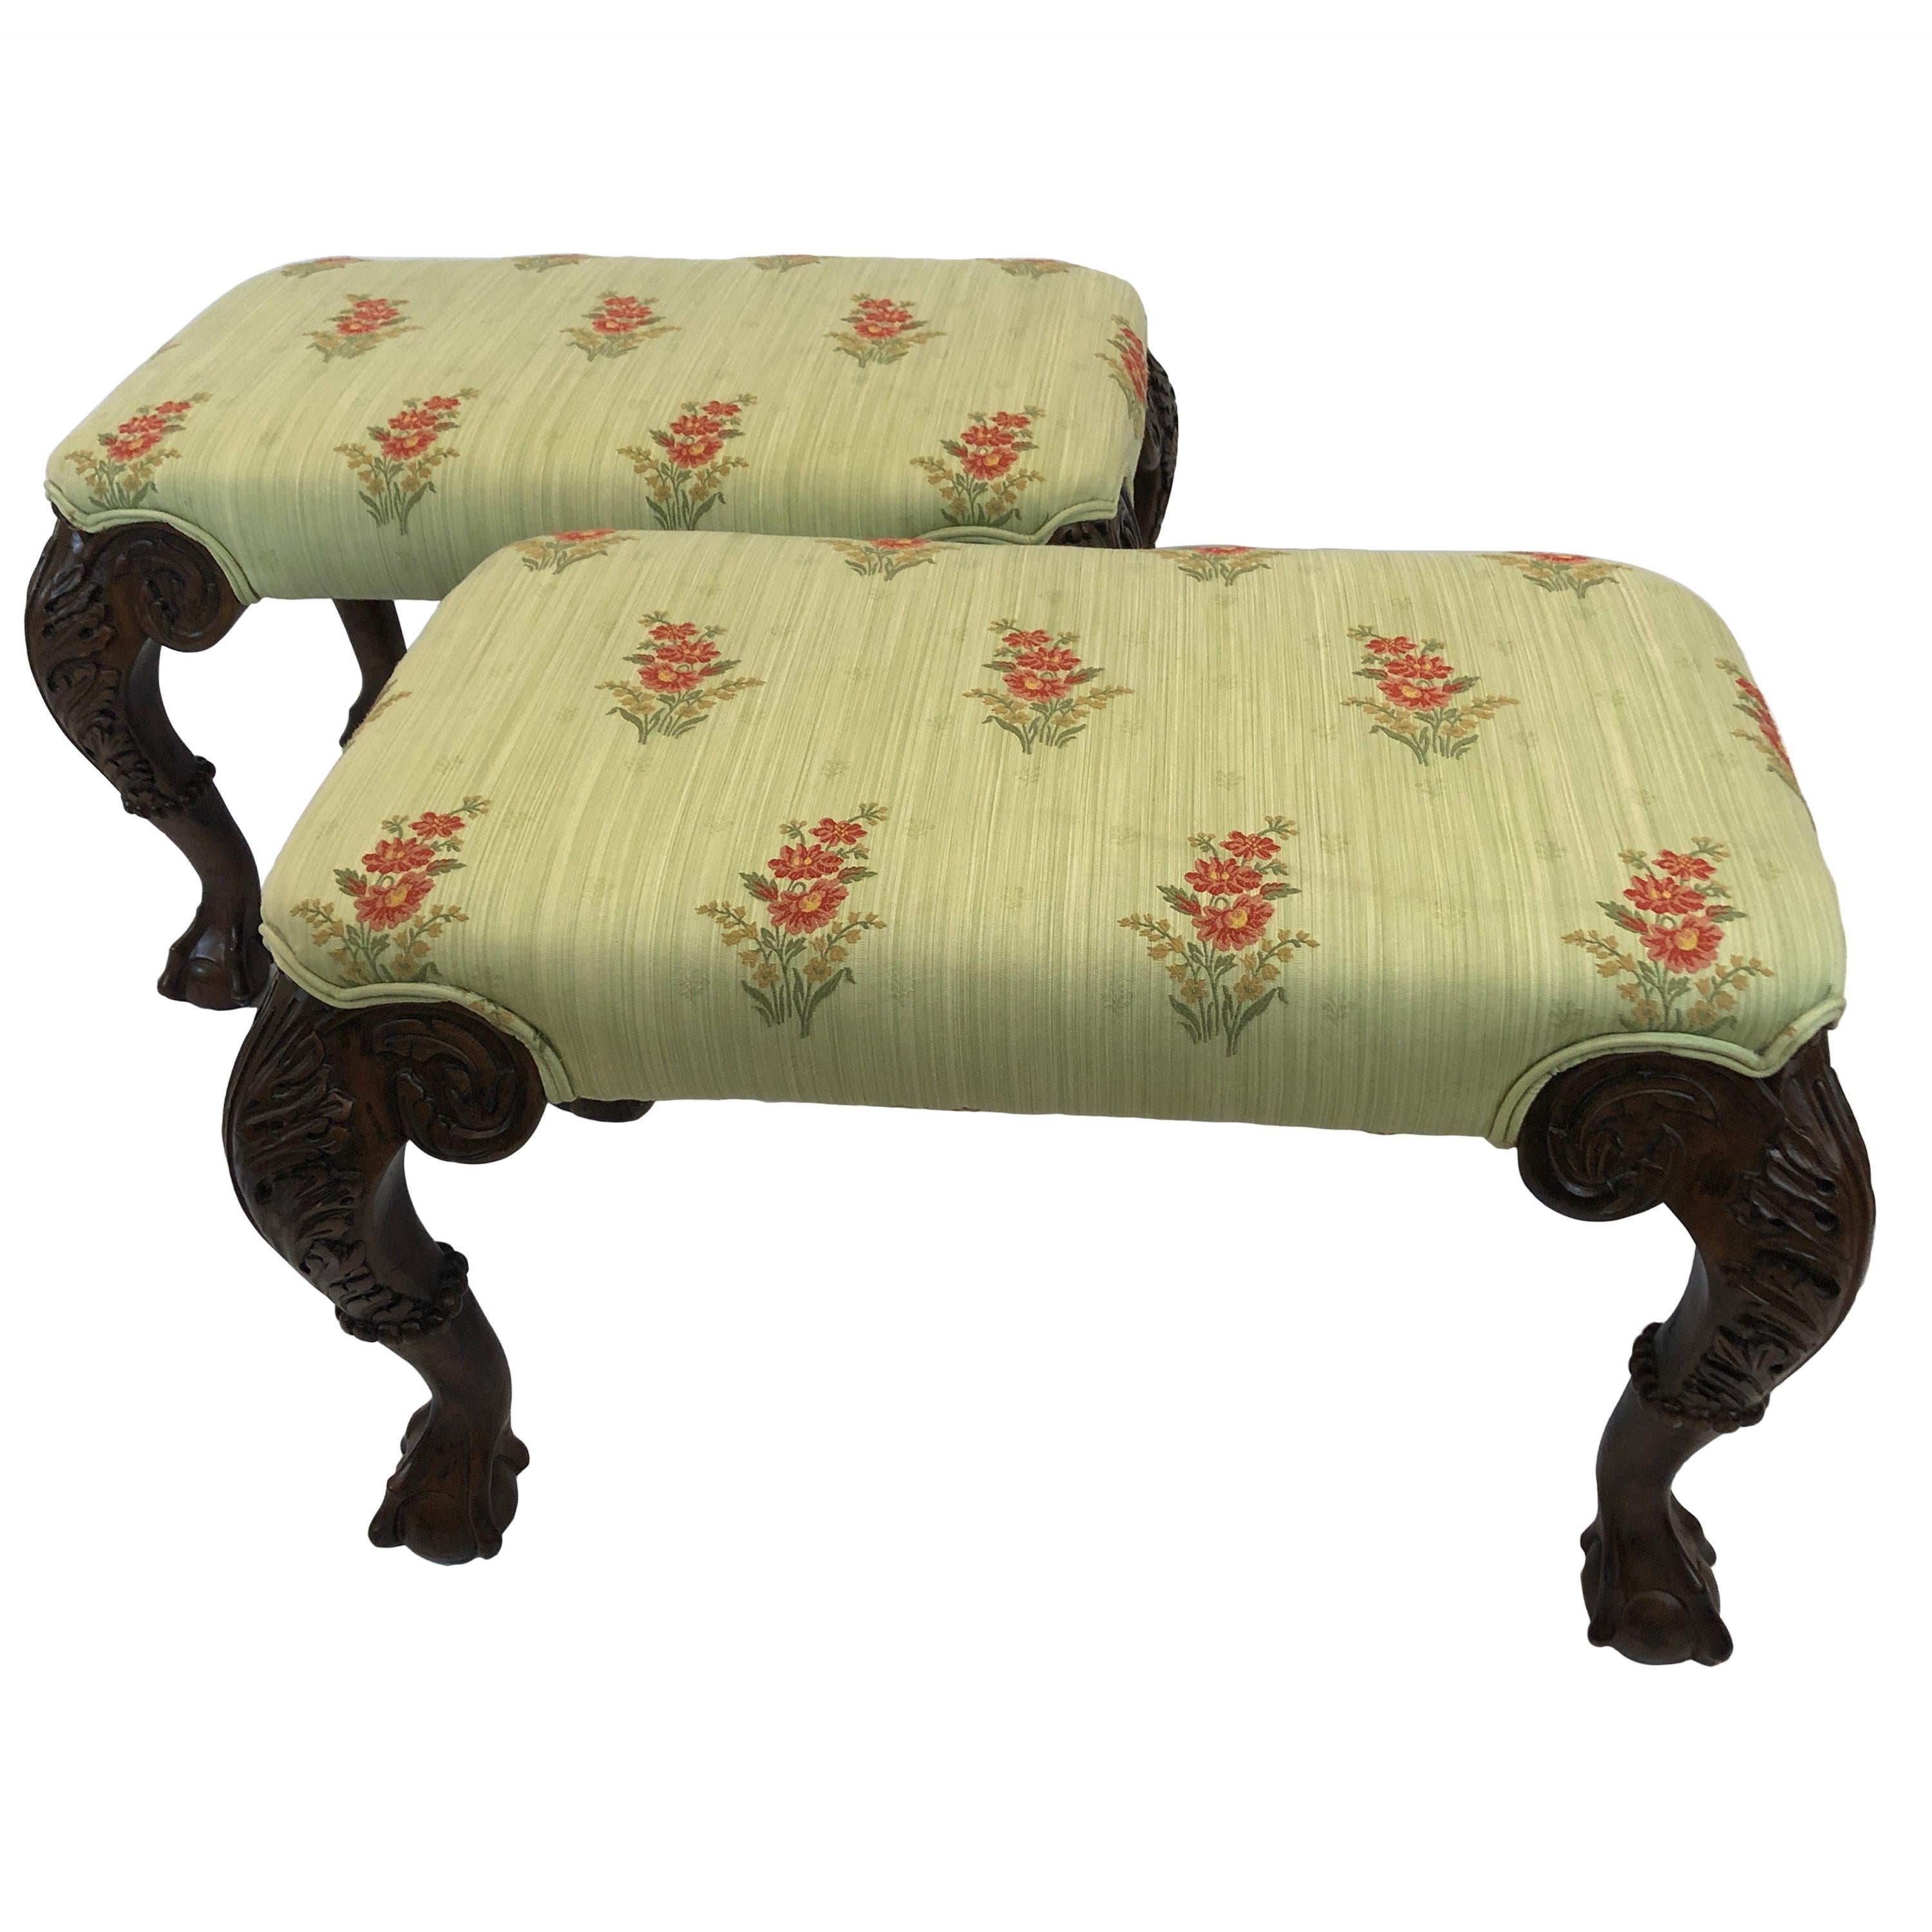 Pair of Beautifully Carved and Upholstered Benches For Sale